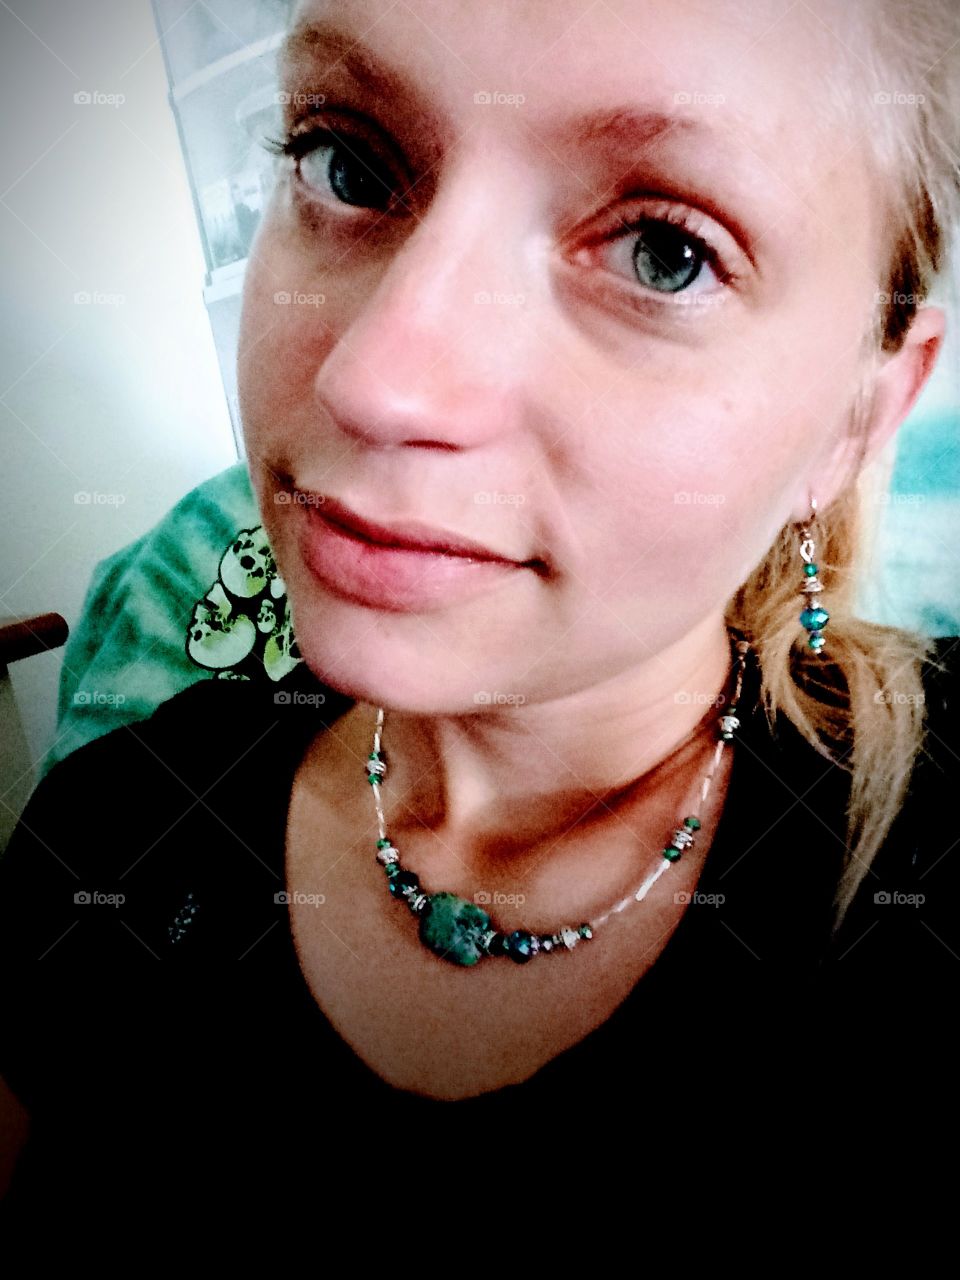 young woman without any makeup trying on new jewelry